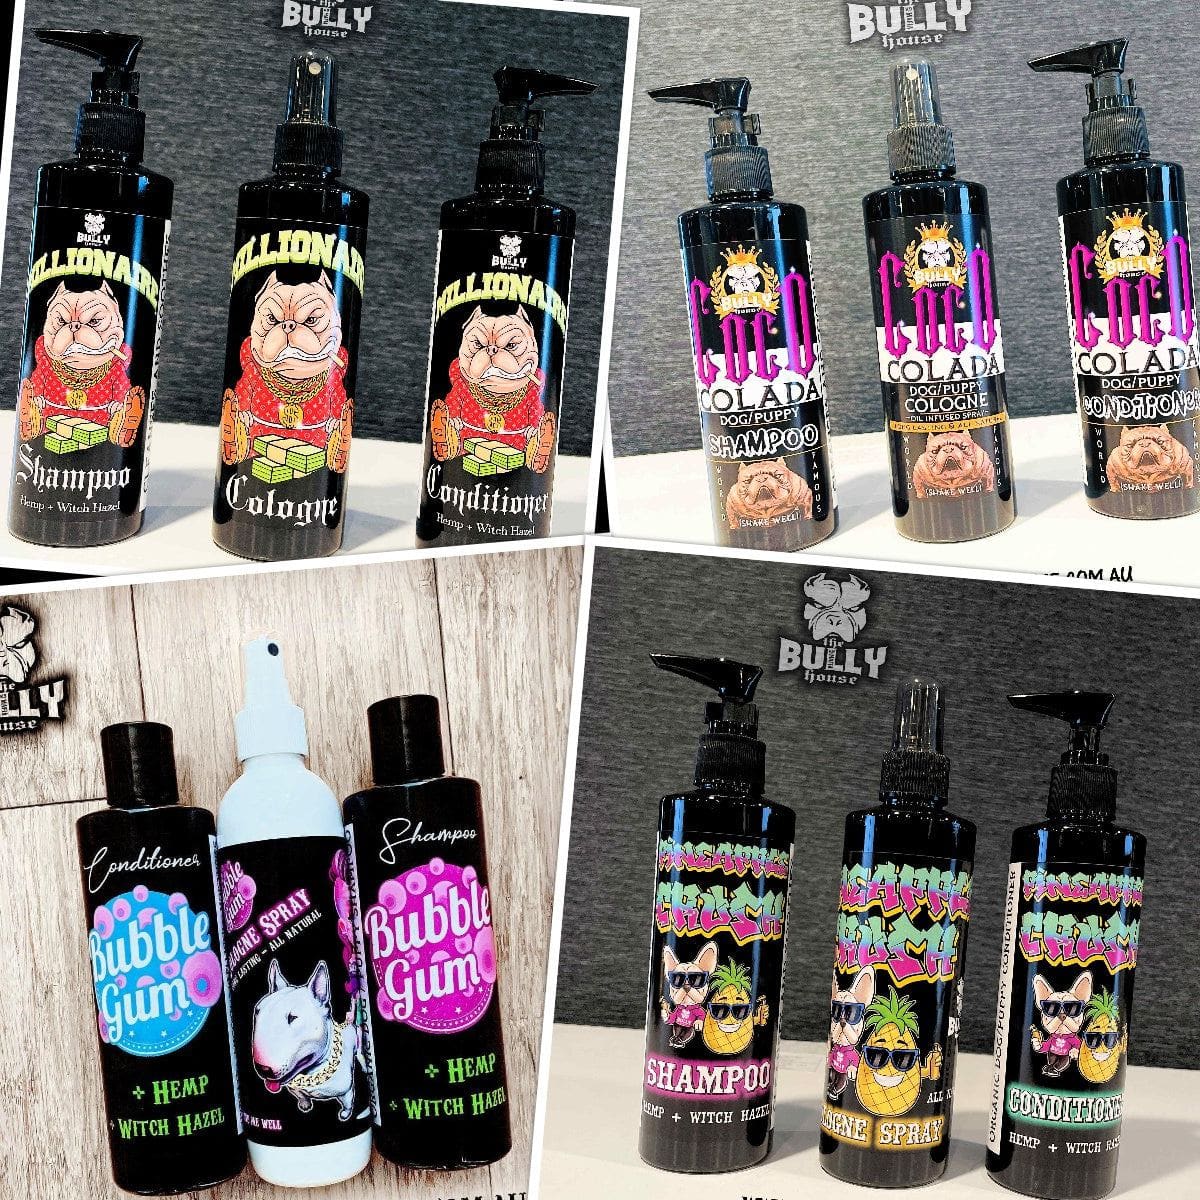 250ml Famous Pet Grooming Collection - 4 x Trio Packs